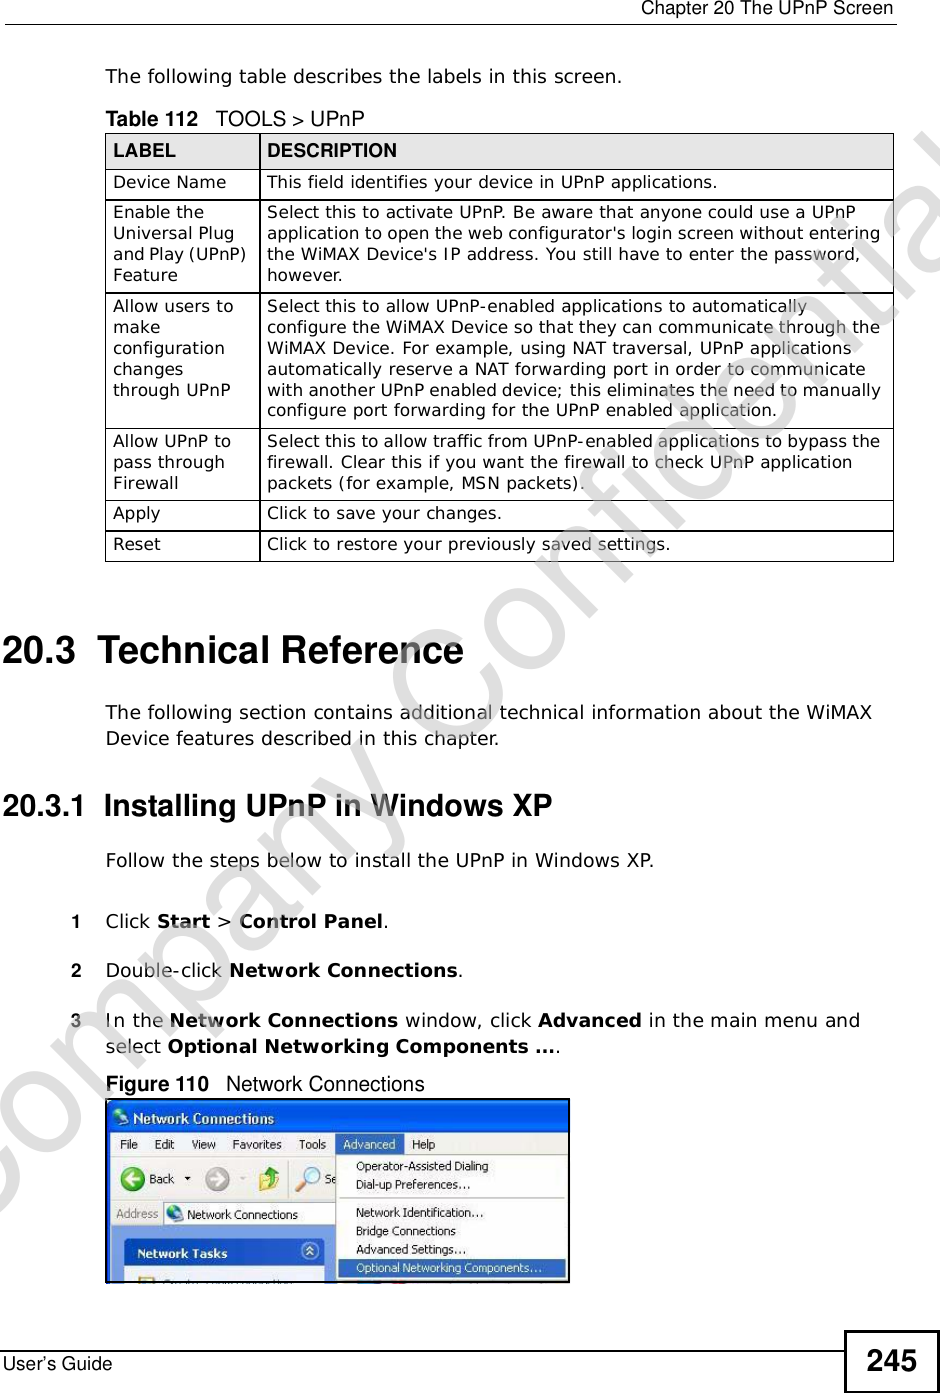  Chapter 20The UPnP ScreenUser’s Guide 245The following table describes the labels in this screen.    20.3  Technical ReferenceThe following section contains additional technical information about the WiMAX Device features described in this chapter.20.3.1  Installing UPnP in Windows XPFollow the steps below to install the UPnP in Windows XP.1Click Start &gt; Control Panel.2Double-click Network Connections.3In the Network Connections window, click Advanced in the main menu and select Optional Networking Components ….Figure 110   Network ConnectionsTable 112   TOOLS &gt; UPnPLABEL DESCRIPTIONDevice Name This field identifies your device in UPnP applications.Enable the Universal Plug and Play (UPnP) Feature Select this to activate UPnP. Be aware that anyone could use a UPnP application to open the web configurator&apos;s login screen without entering the WiMAX Device&apos;s IP address. You still have to enter the password, however.Allow users to make configuration changes through UPnPSelect this to allow UPnP-enabled applications to automatically configure the WiMAX Device so that they can communicate through the WiMAX Device. For example, using NAT traversal, UPnP applications automatically reserve a NAT forwarding port in order to communicate with another UPnP enabled device; this eliminates the need to manually configure port forwarding for the UPnP enabled application. Allow UPnP to pass through FirewallSelect this to allow traffic from UPnP-enabled applications to bypass the firewall. Clear this if you want the firewall to check UPnP application packets (for example, MSN packets).Apply Click to save your changes.Reset Click to restore your previously saved settings.Company Confidential